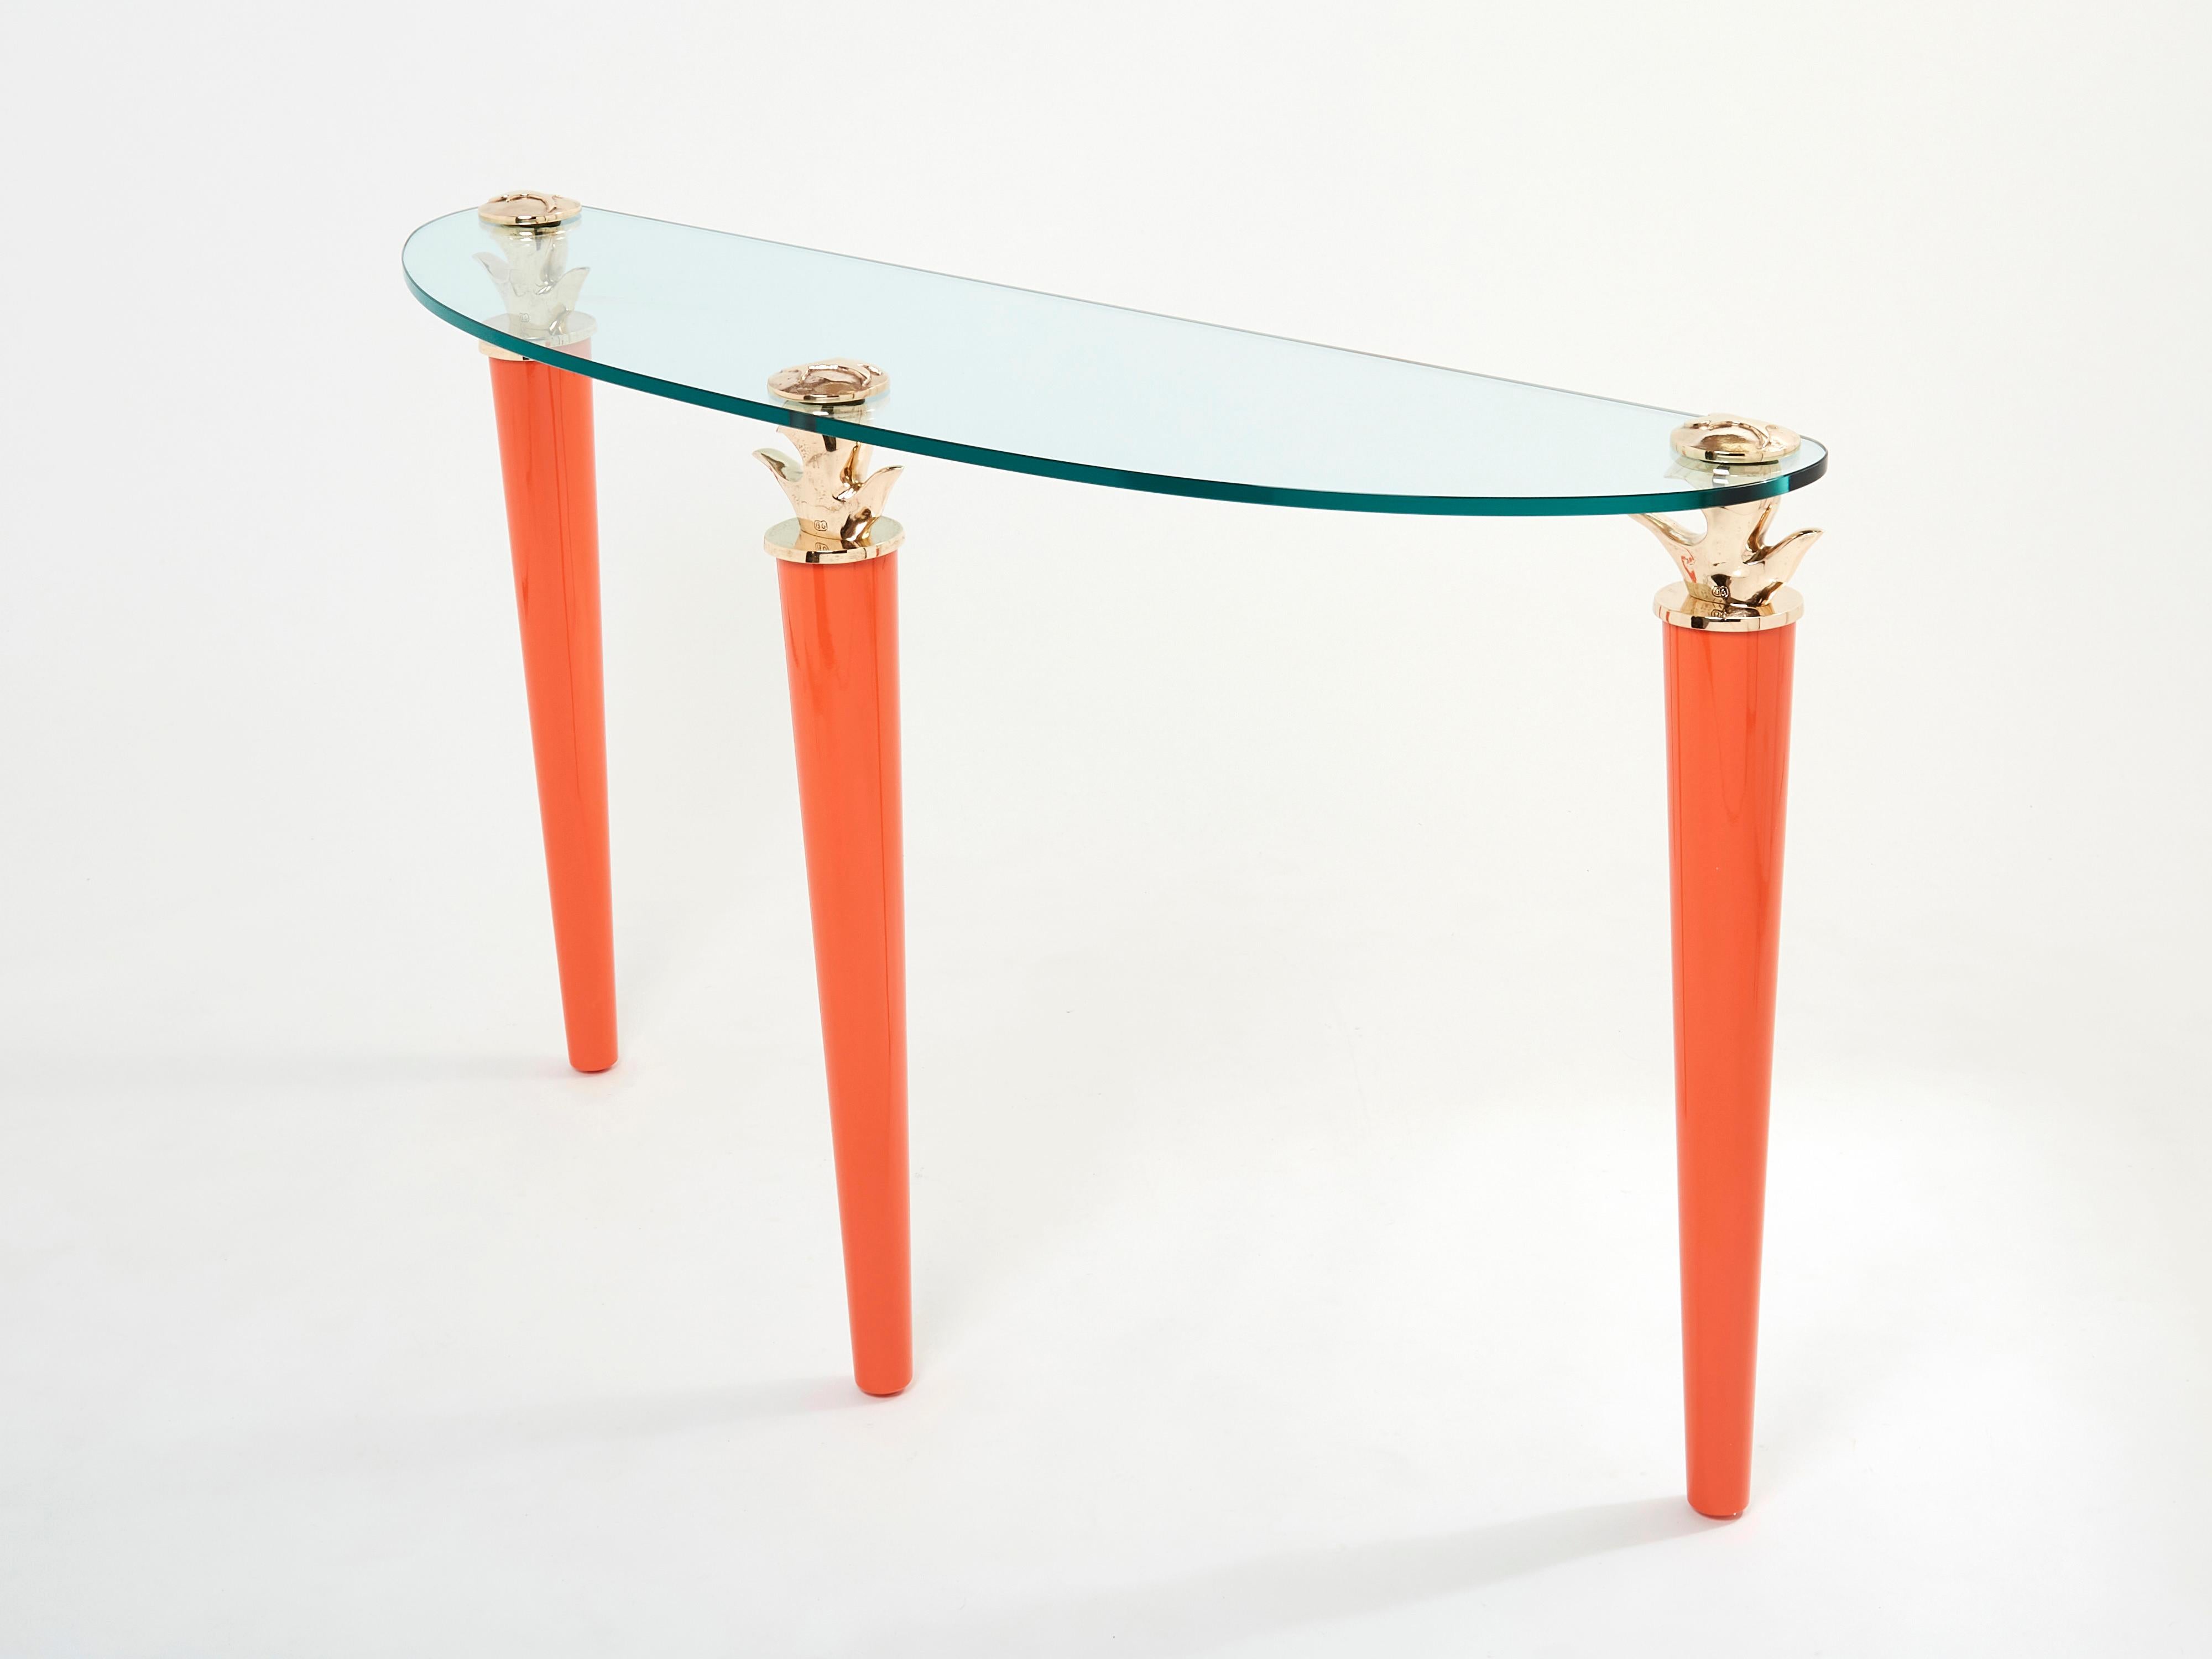 French Orange Lacquered and Bronze Glass Console Table by Garouste & Bonetti 1995 For Sale